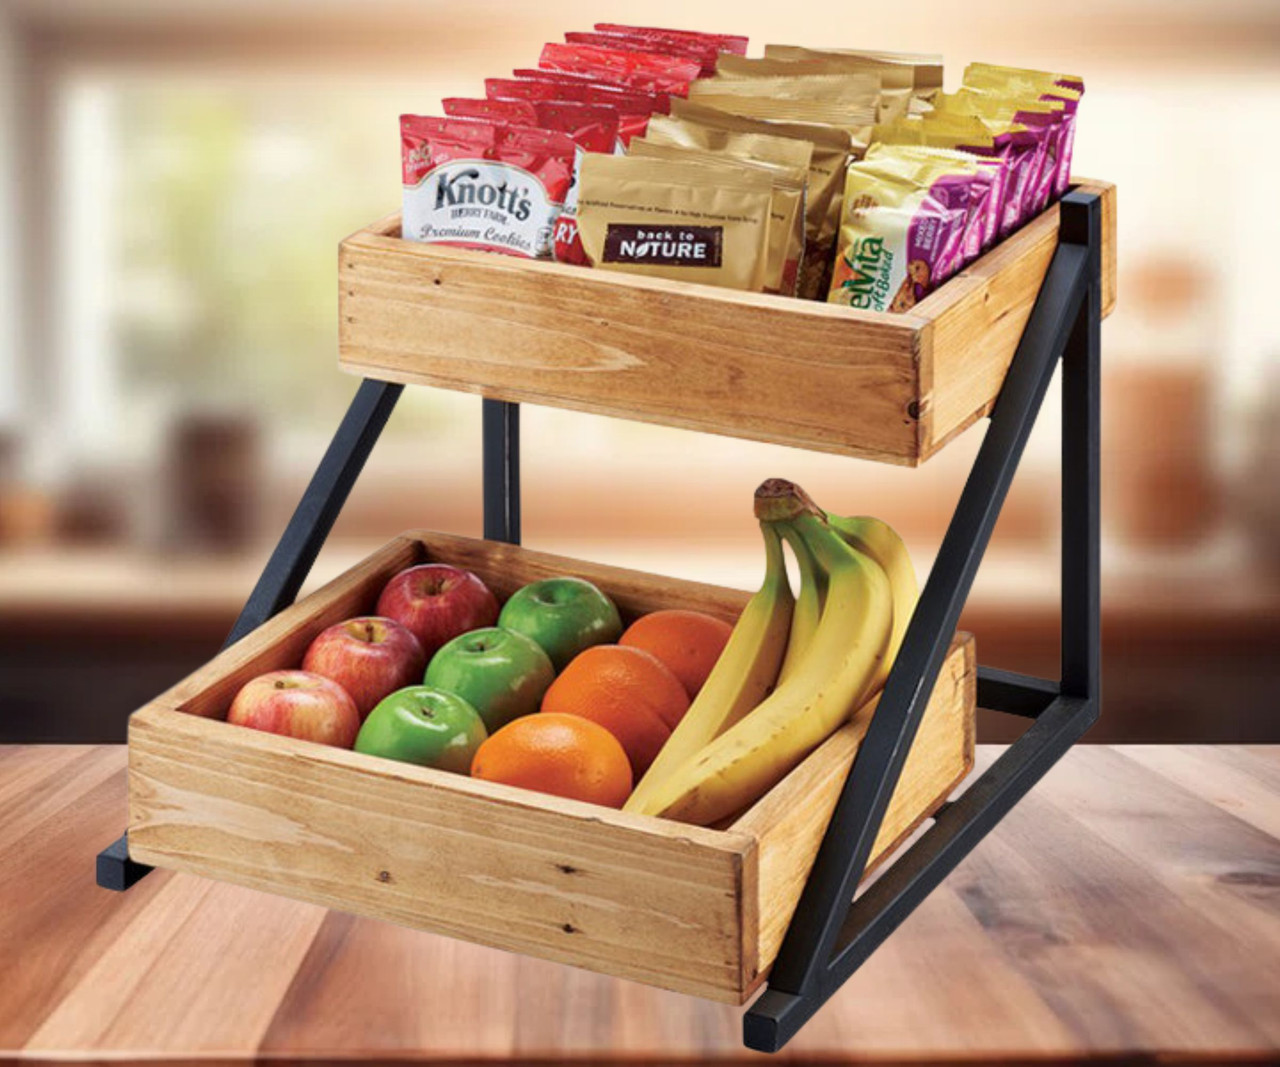 Cal-Mil Madera 2-Tier Merchandiser - 16 1/2" x 15 1/2" x 12" - Rustic Wooden Display Stand